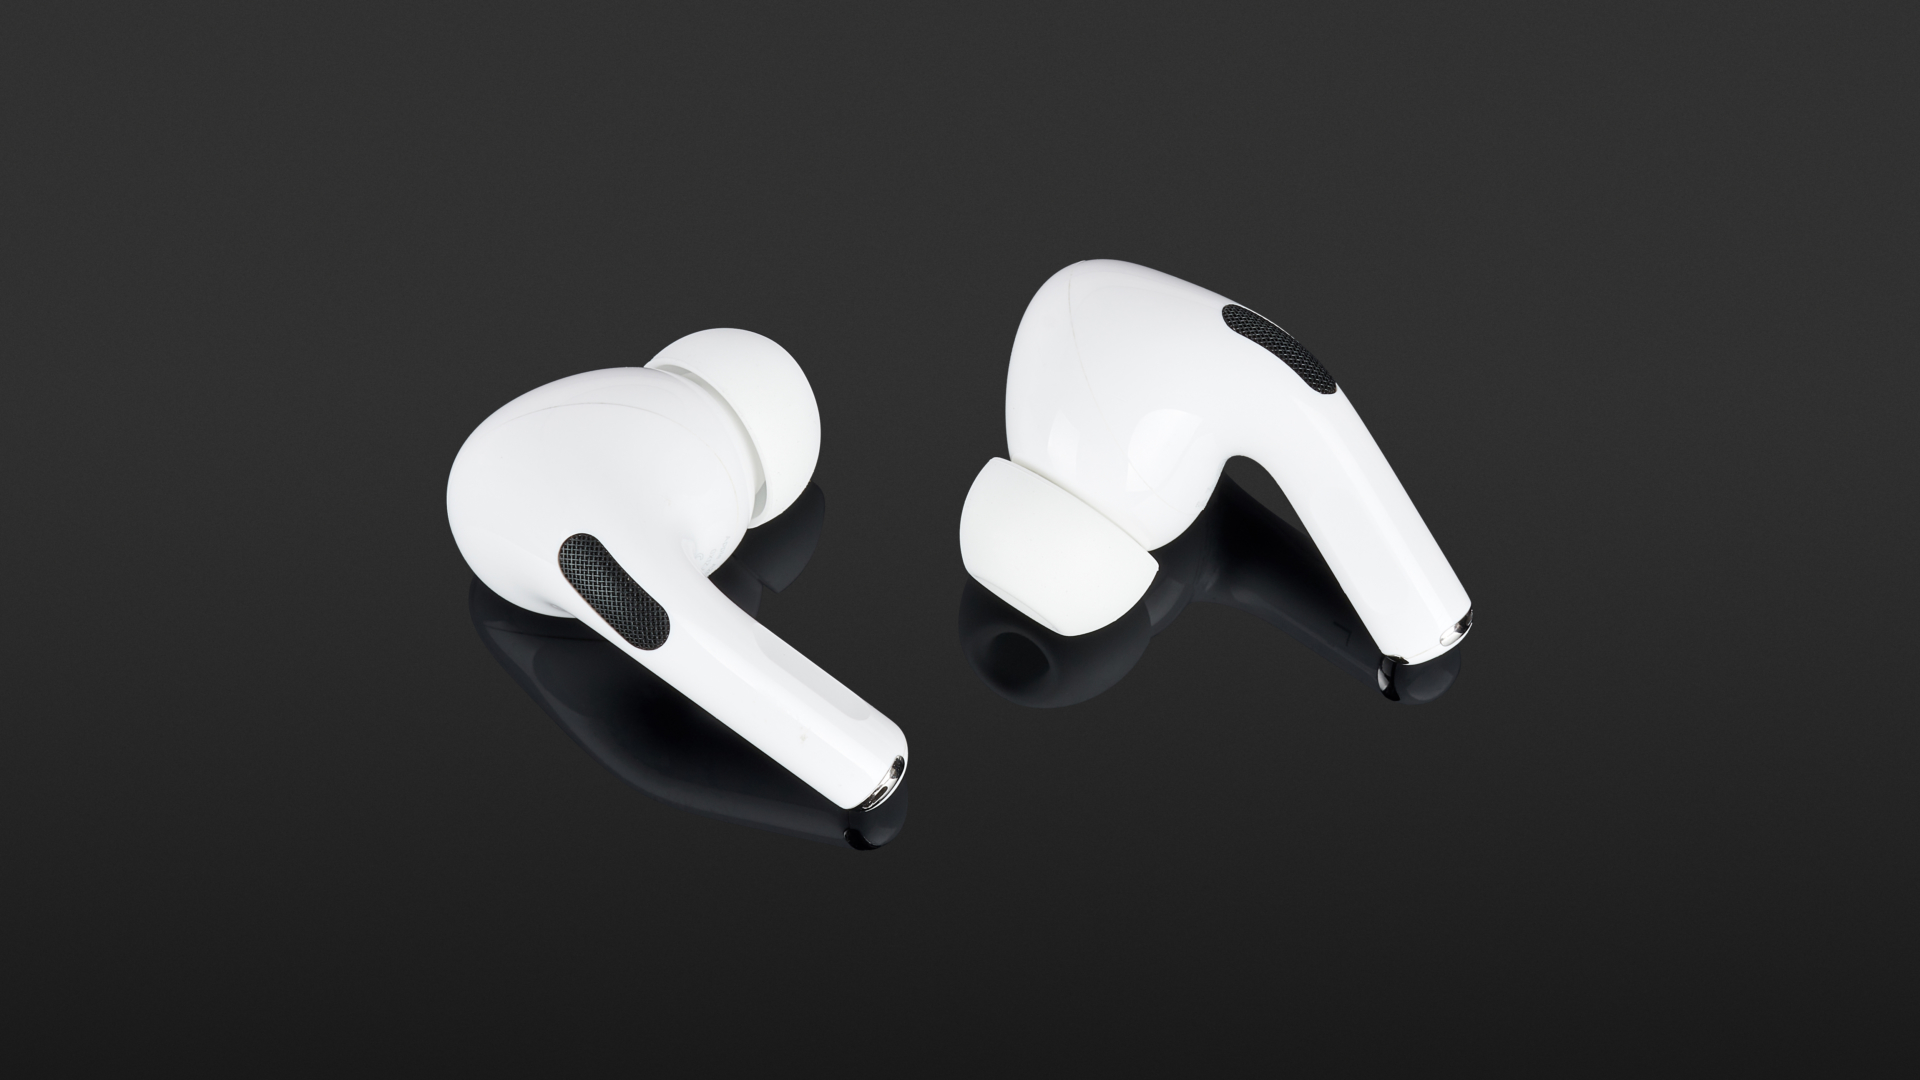 Sony airpods. Наушники Air pods Pro 2. Apple AIRPODS Pro 2020. Apple AIRPODS Pro 1. Наушники Apple AIRPODS Pro (2-го поколения, 2022).